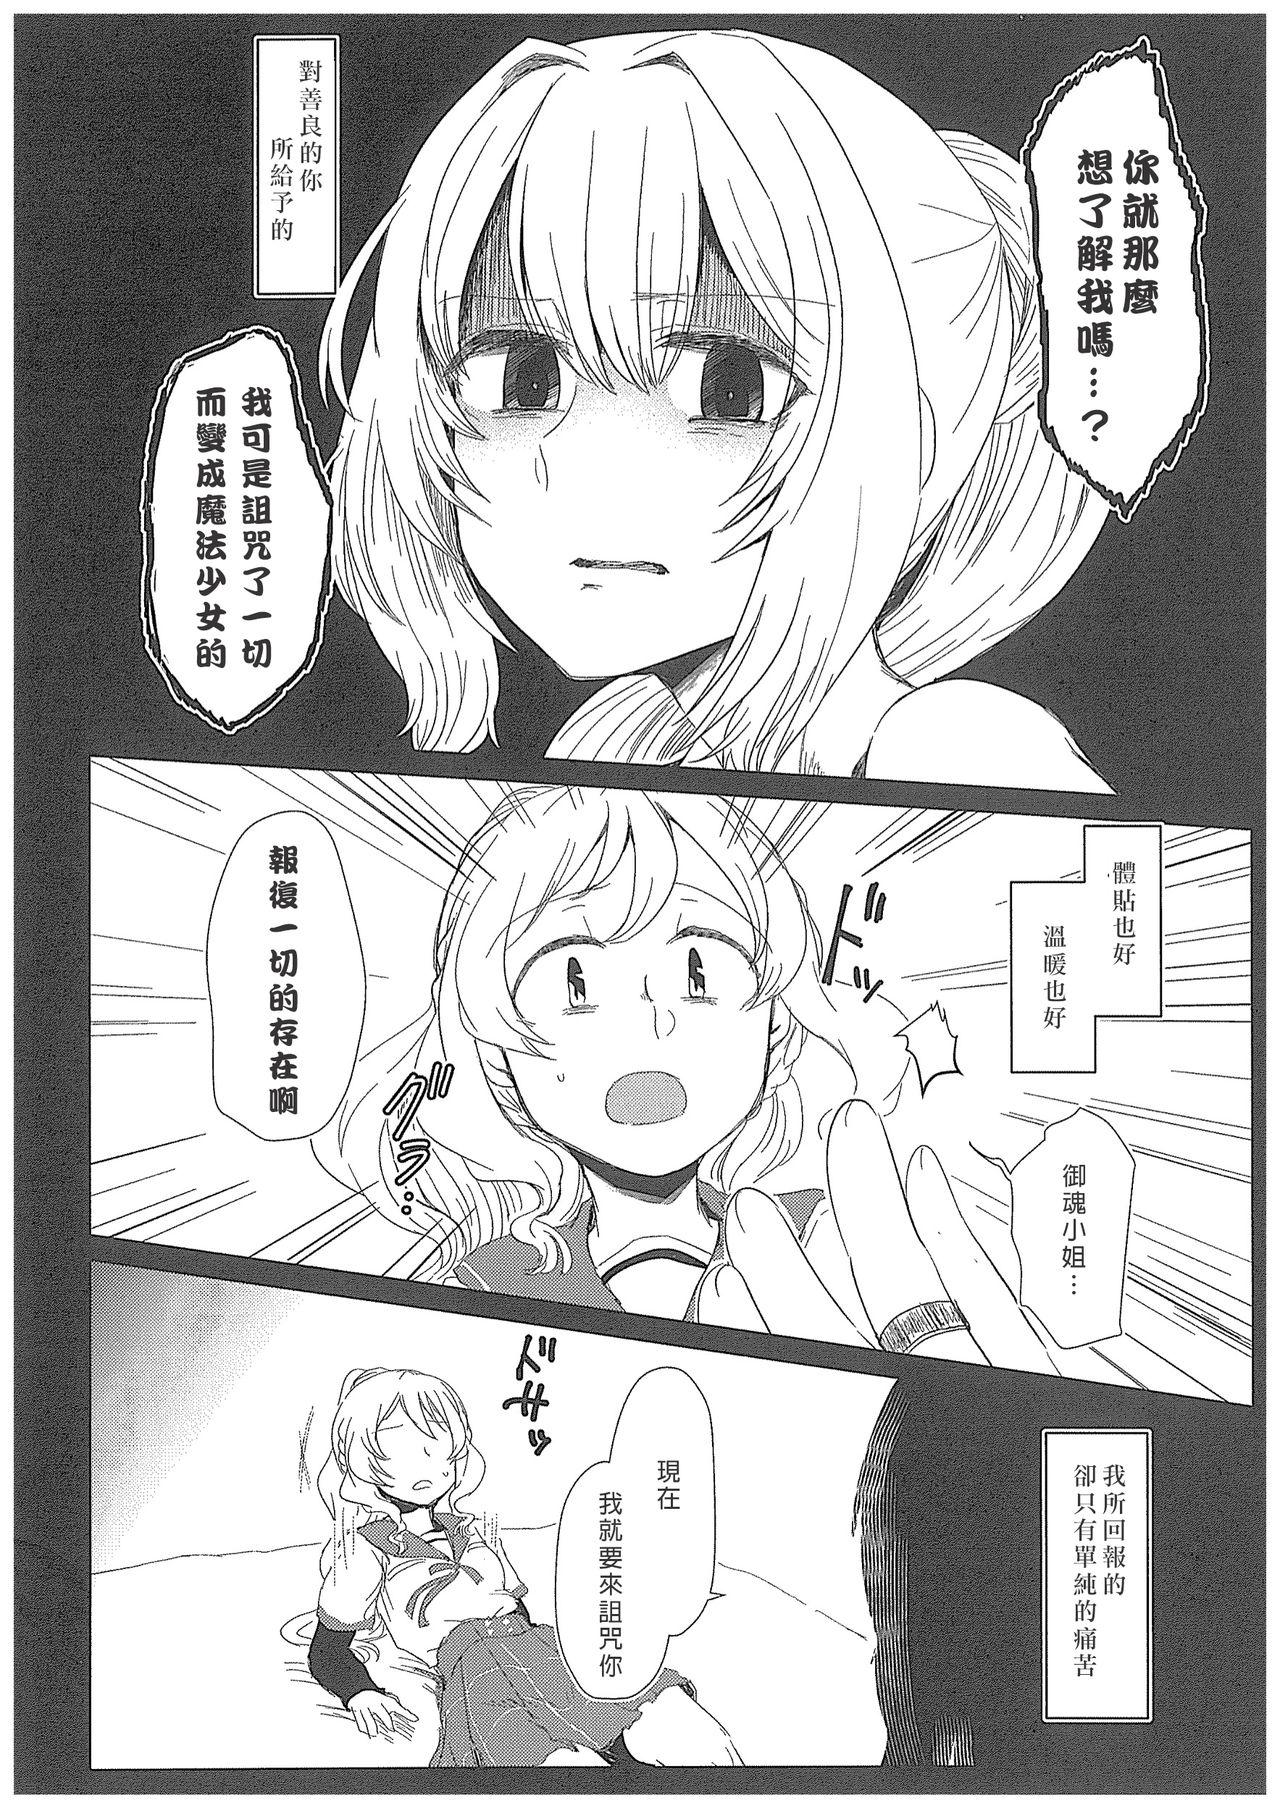 Ass Fucked From nothing,nothing comes|漢堡牛排不能無中生有 - Puella magi madoka magica side story magia record Clothed - Page 11